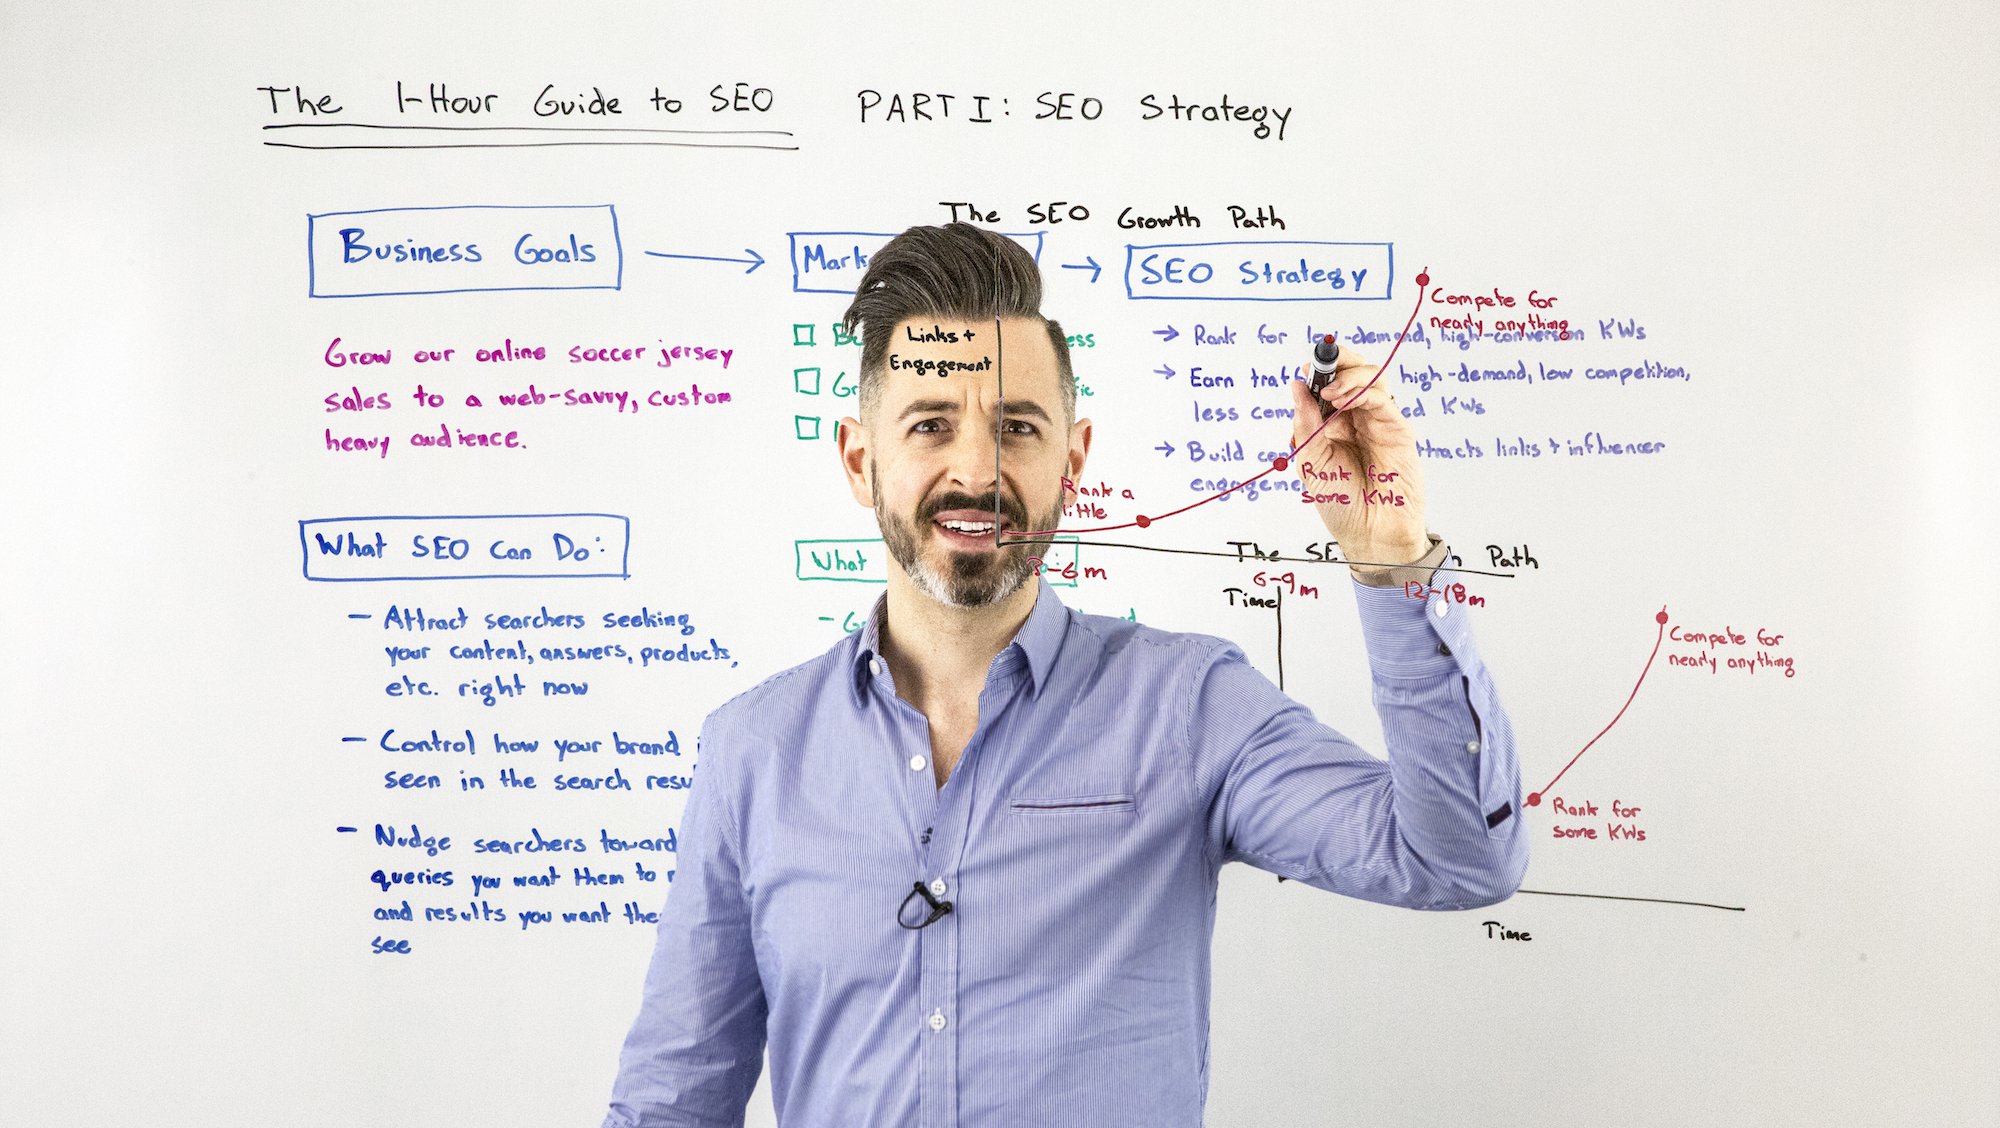 The One-Hour Guide to SEO, Part 1: SEO Strategy